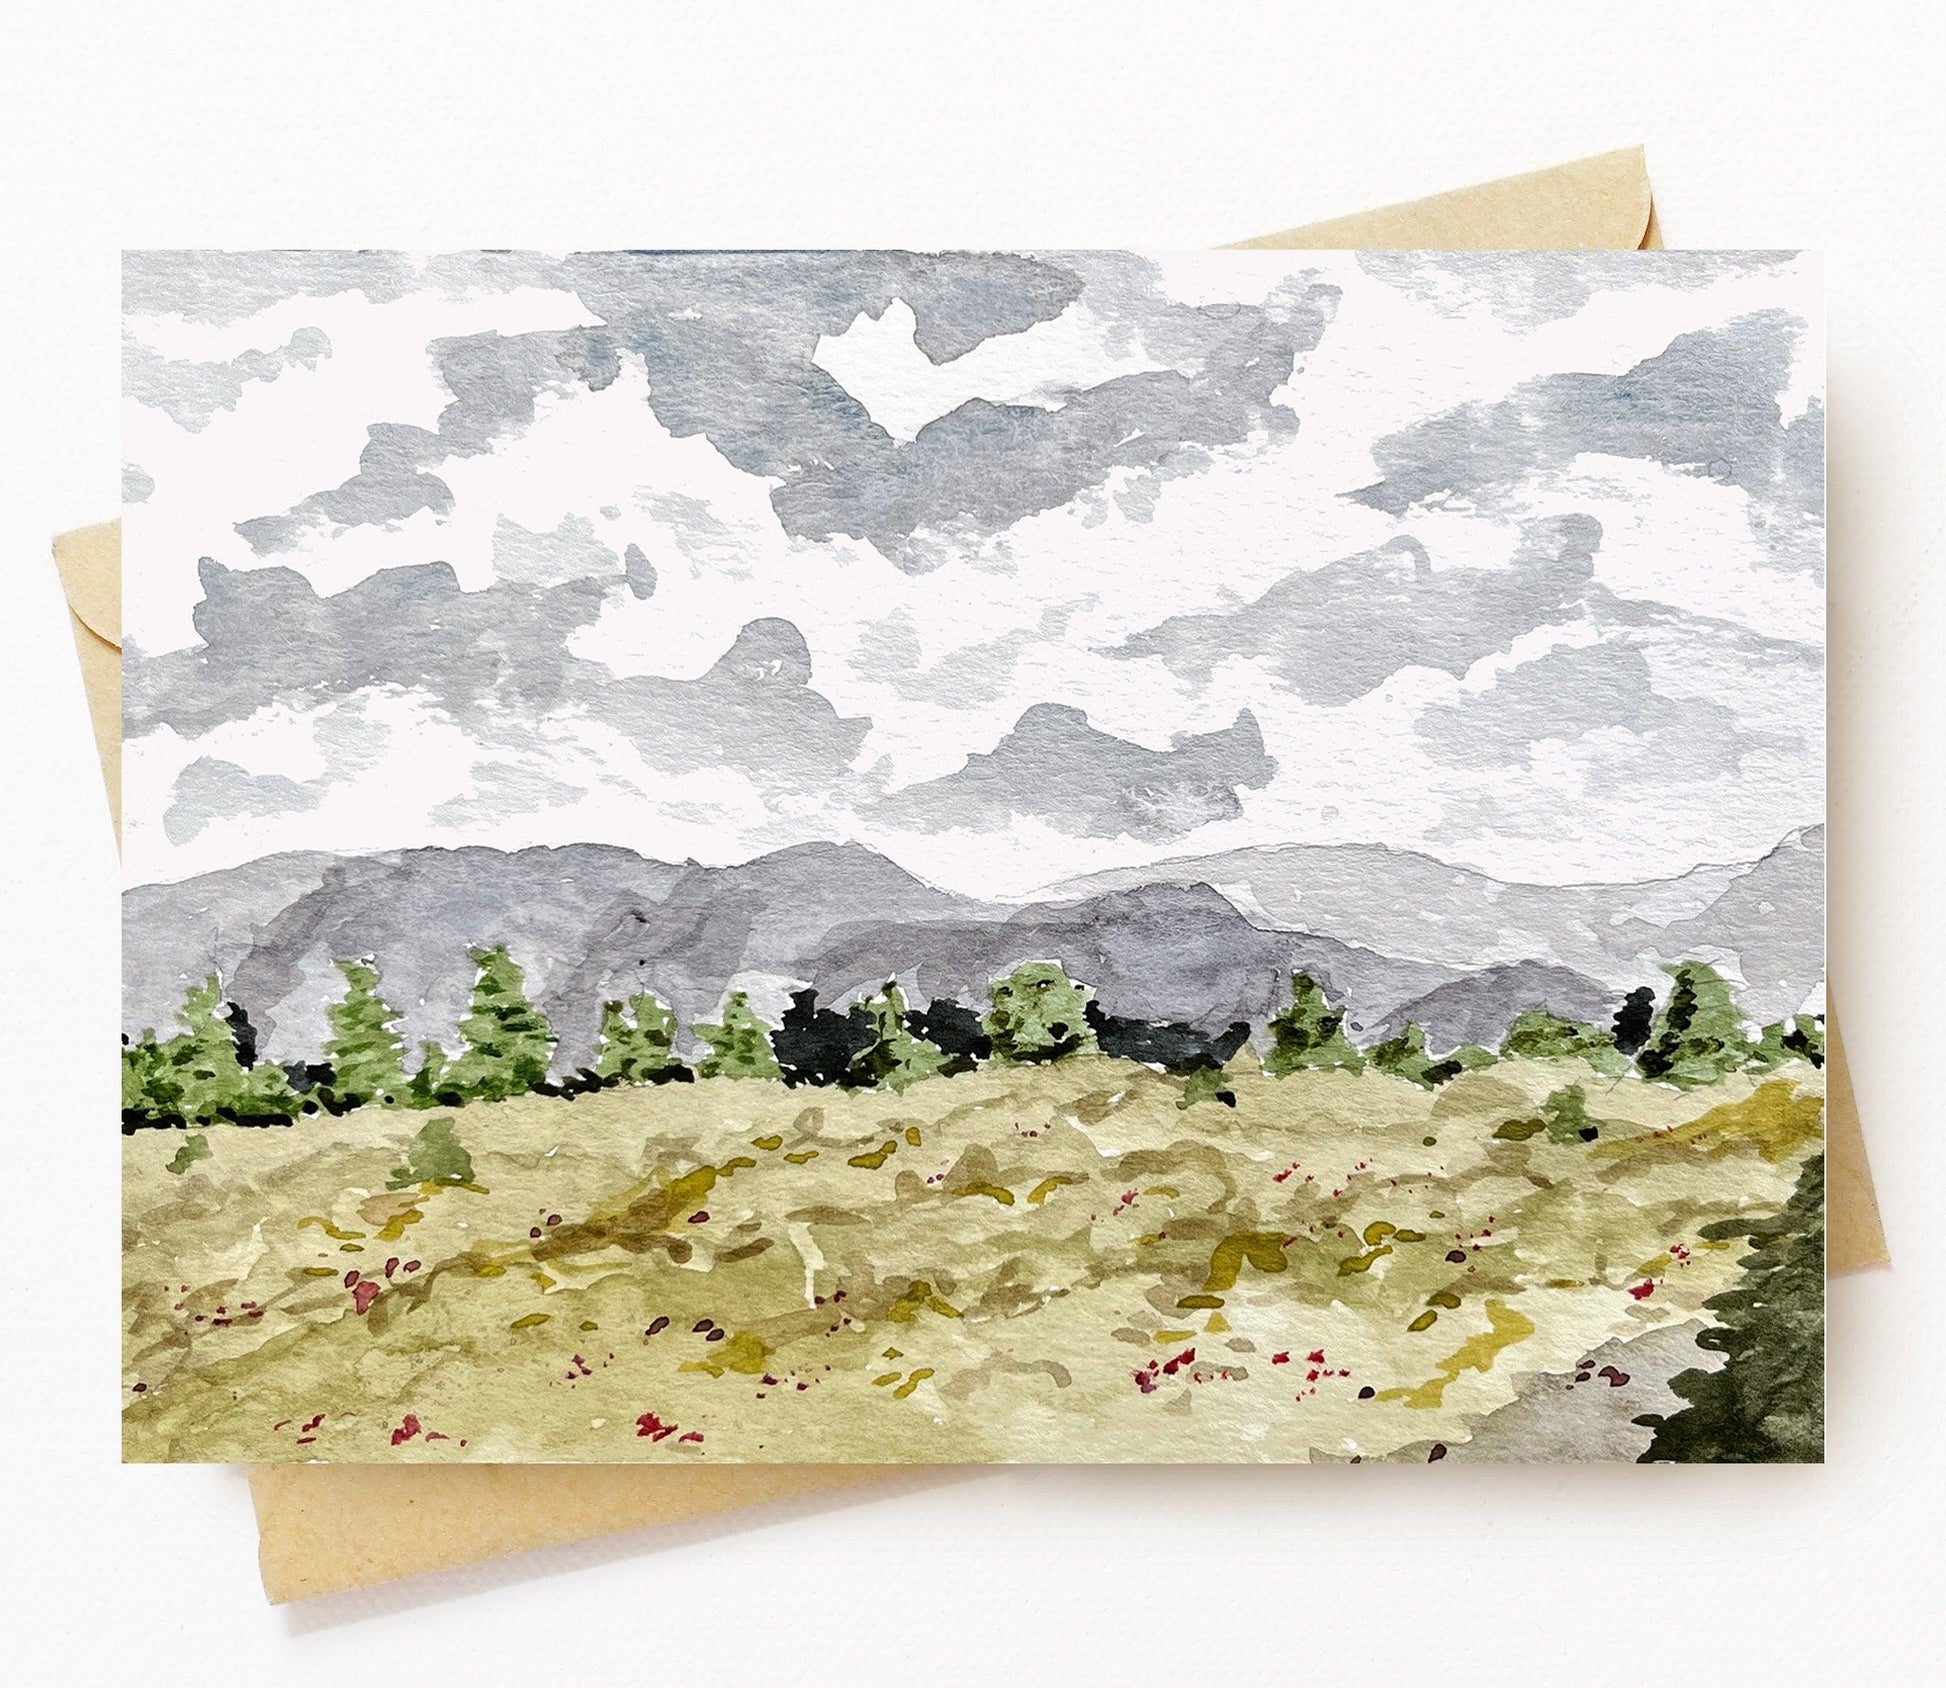 BellavanceInk: Greeting Card With Watercolor Of Mountains And Meadow in Crozet Virginia  5 x 7 Inches - BellavanceInk